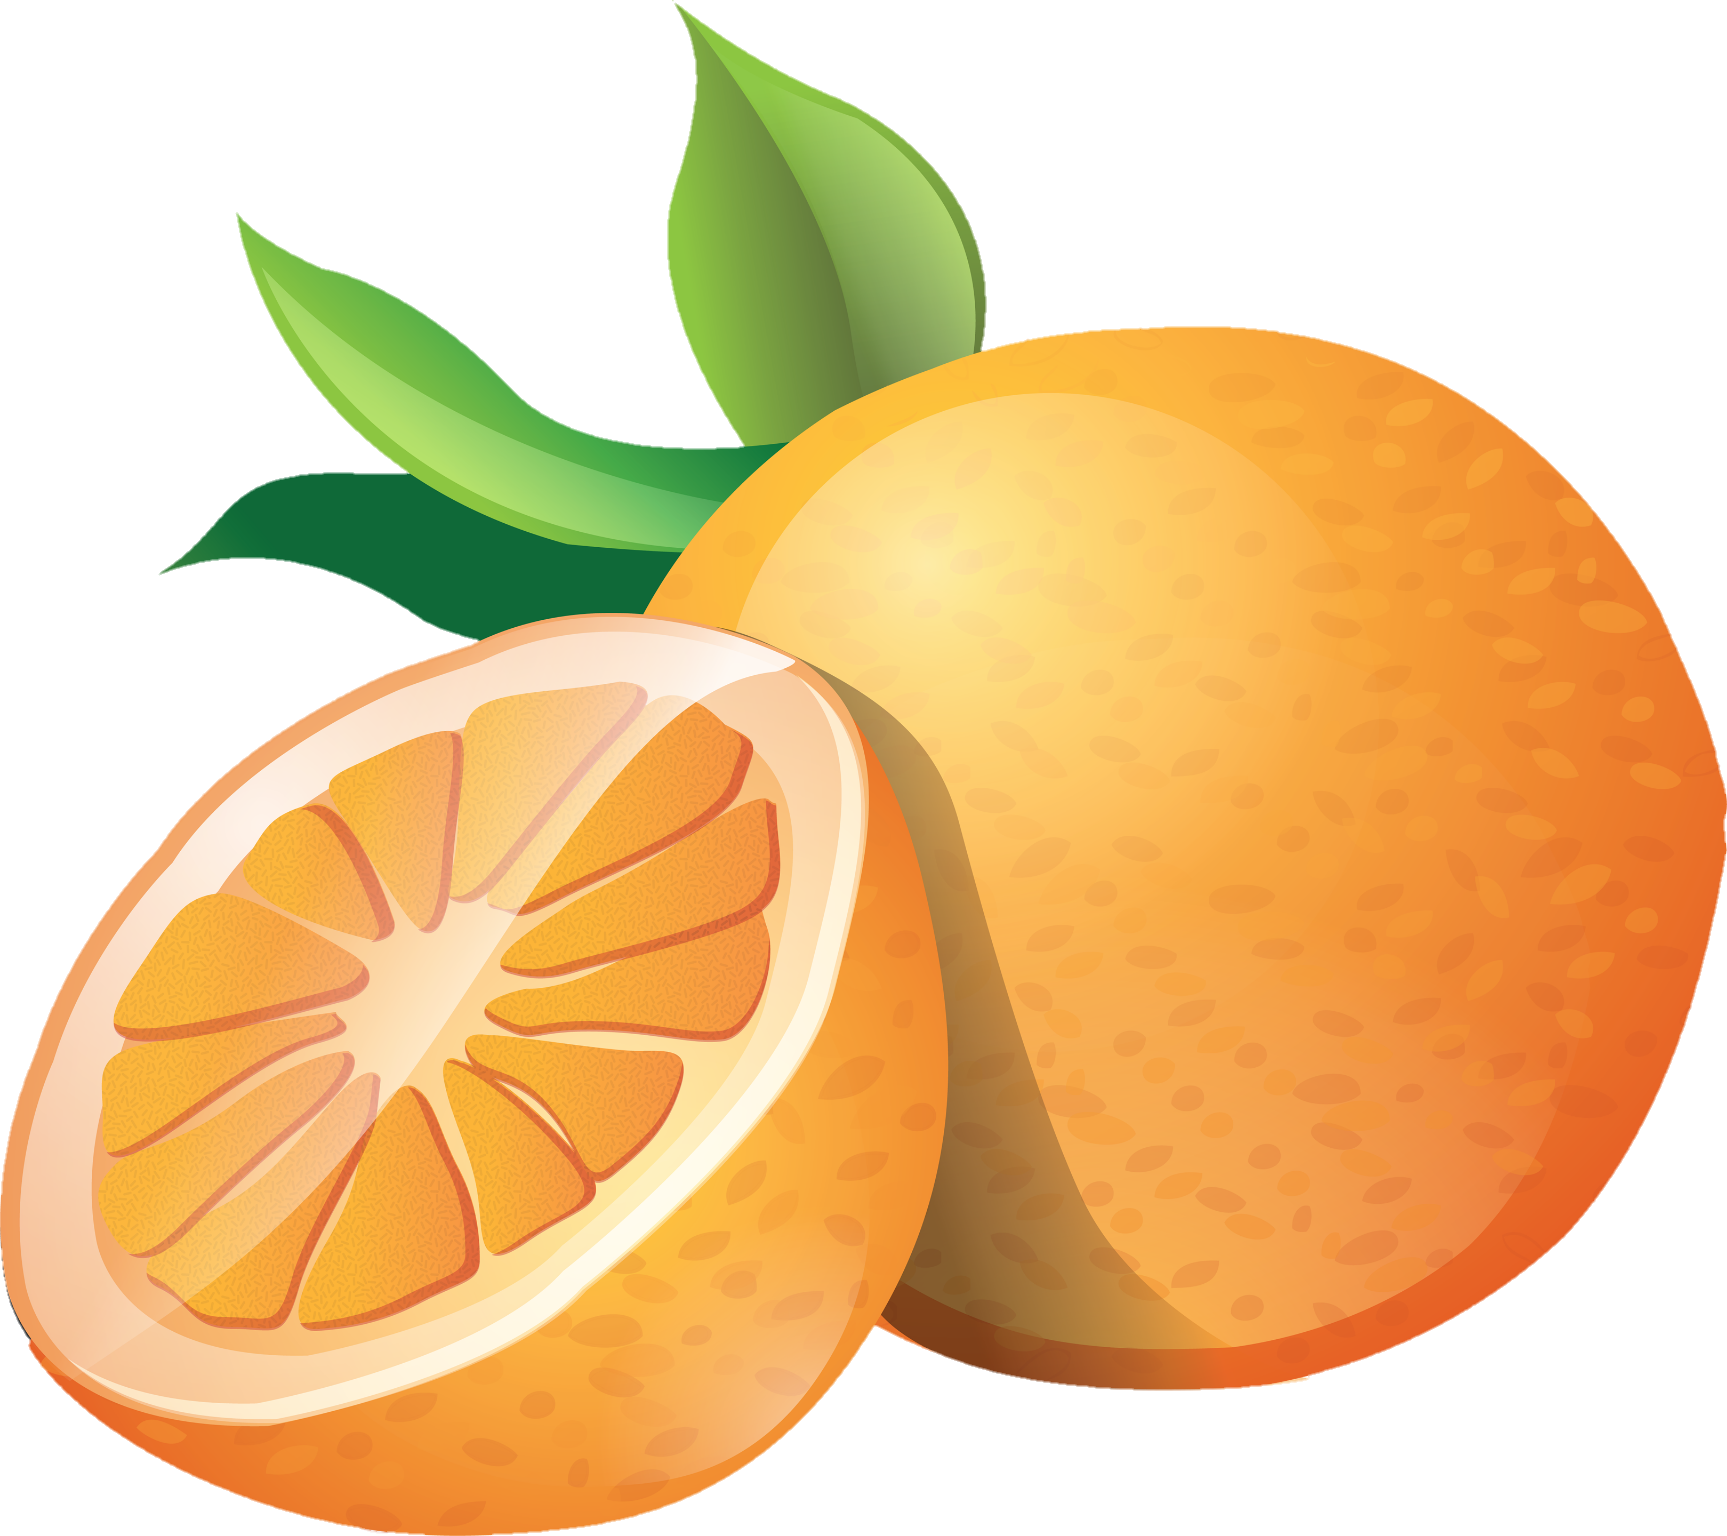 orange-png-from-pngfre-9